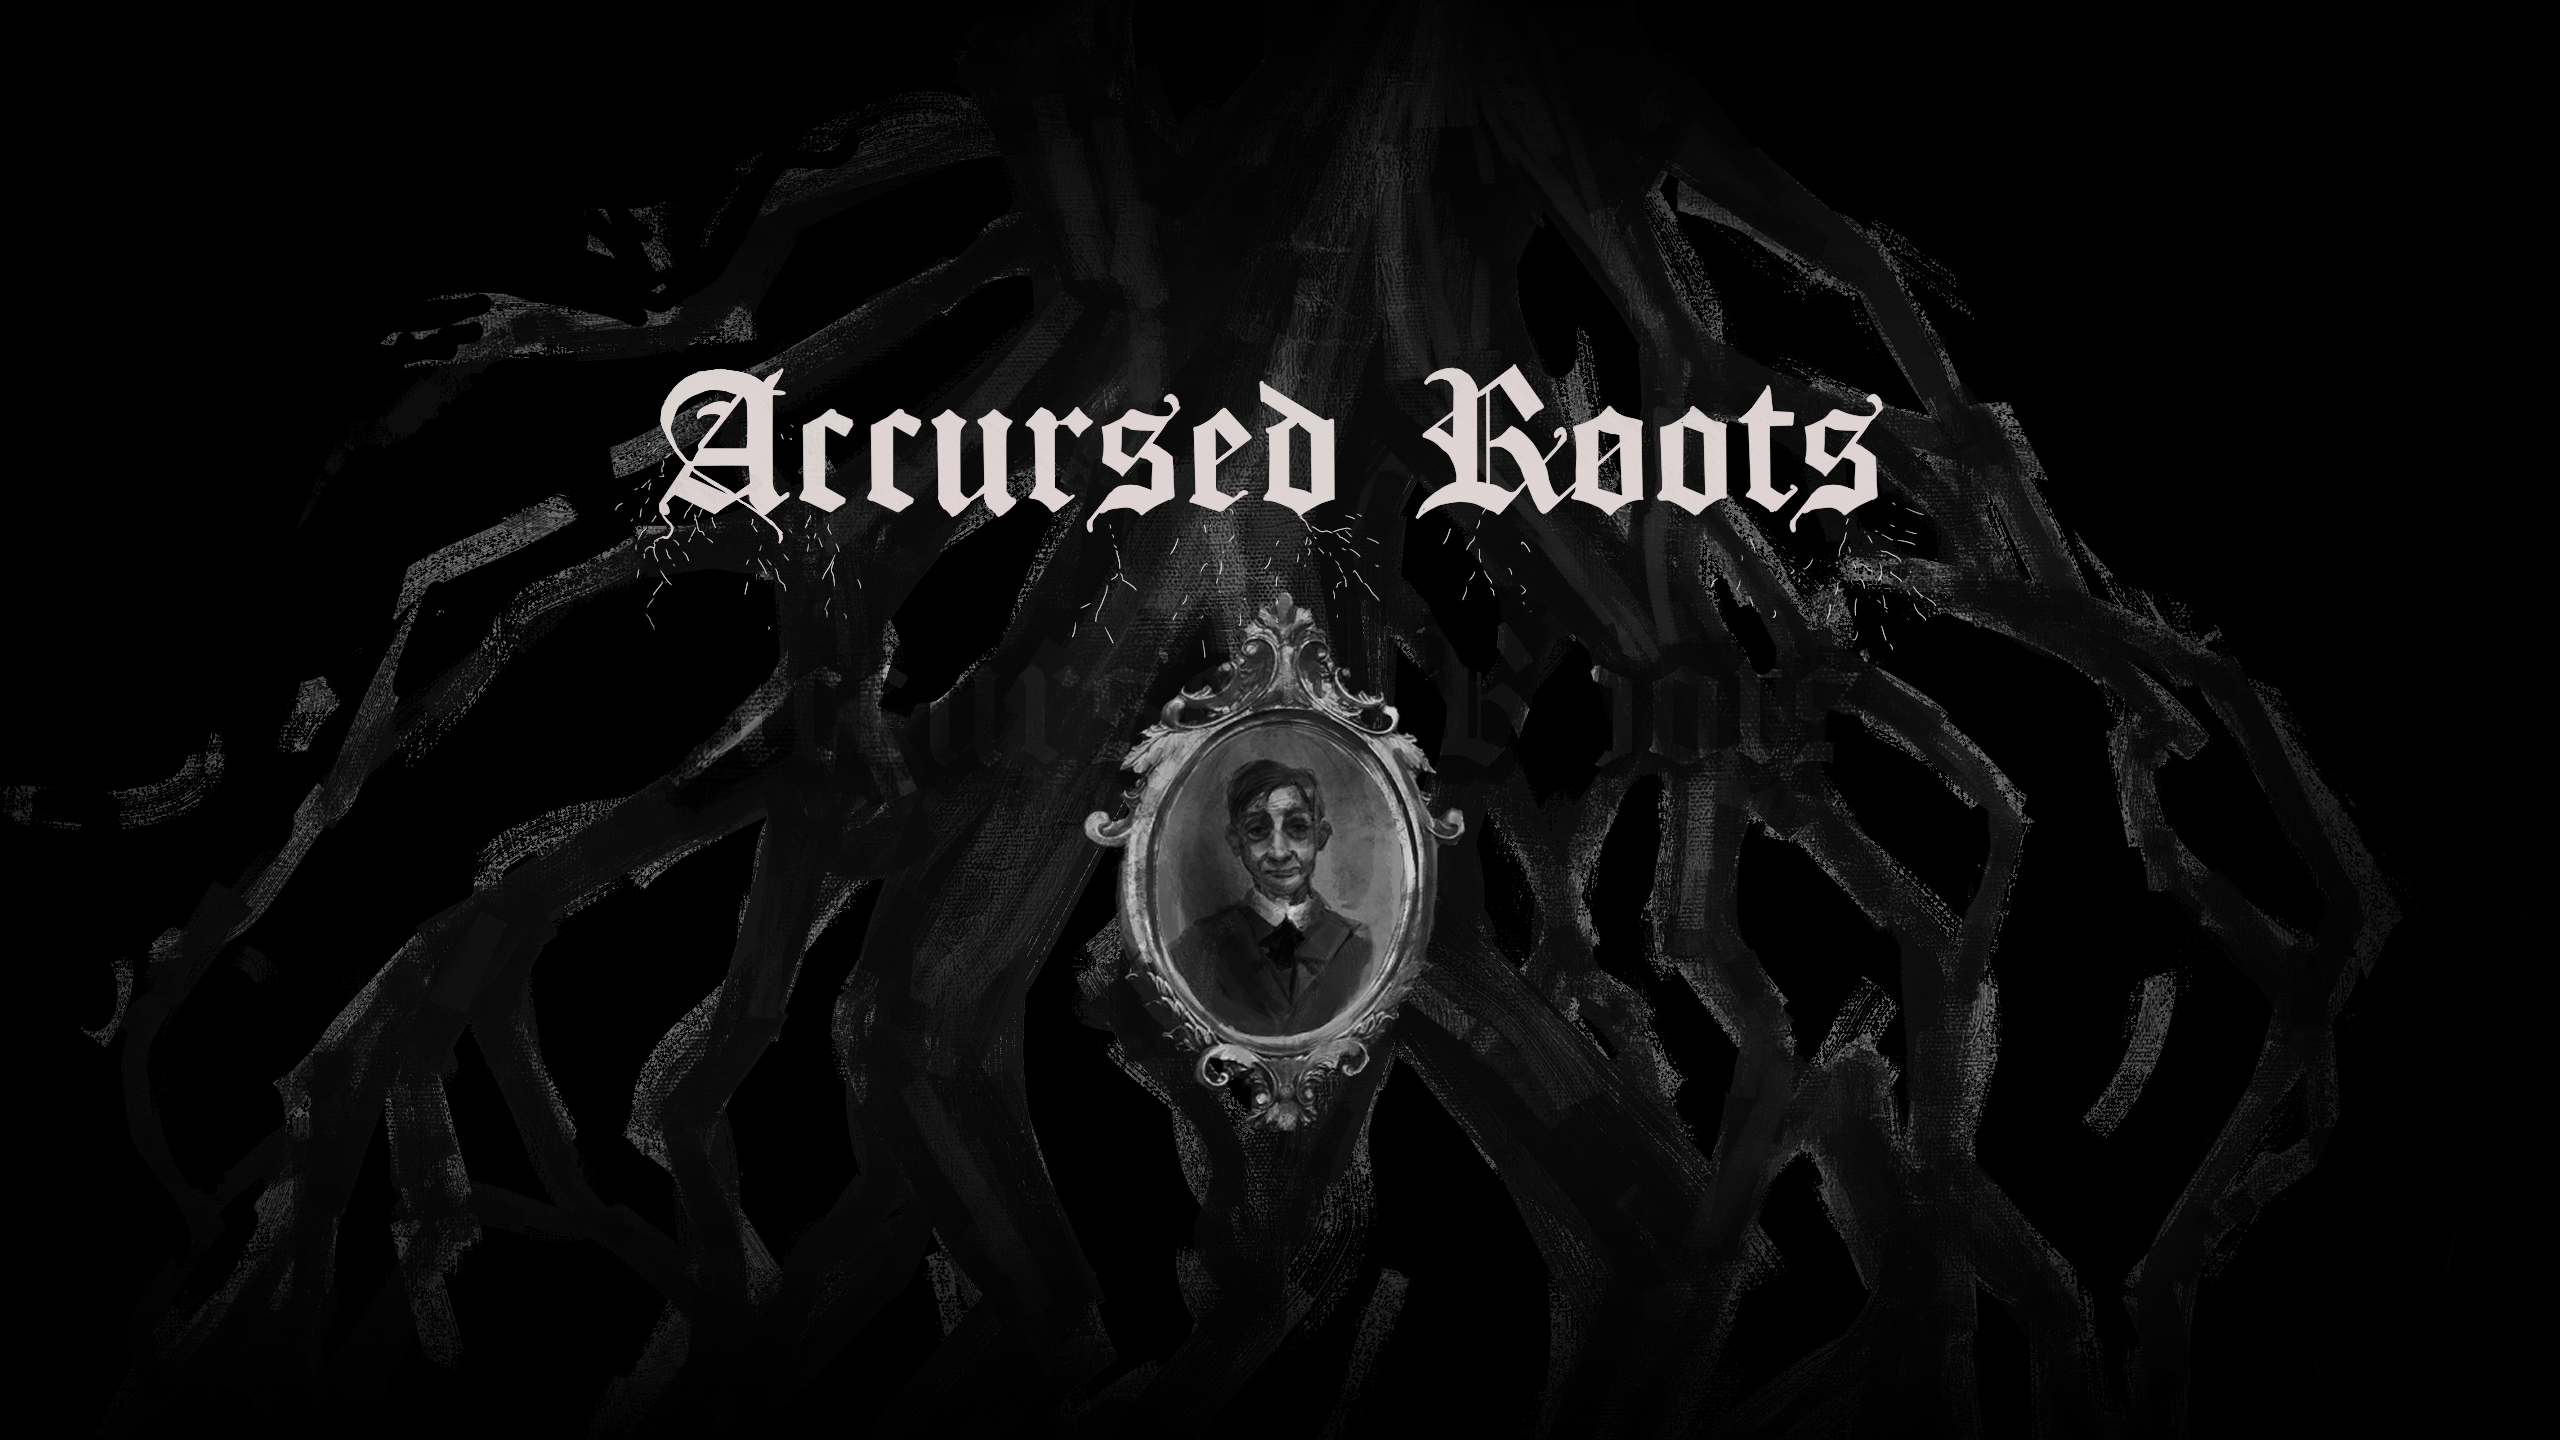 Accursed Roots